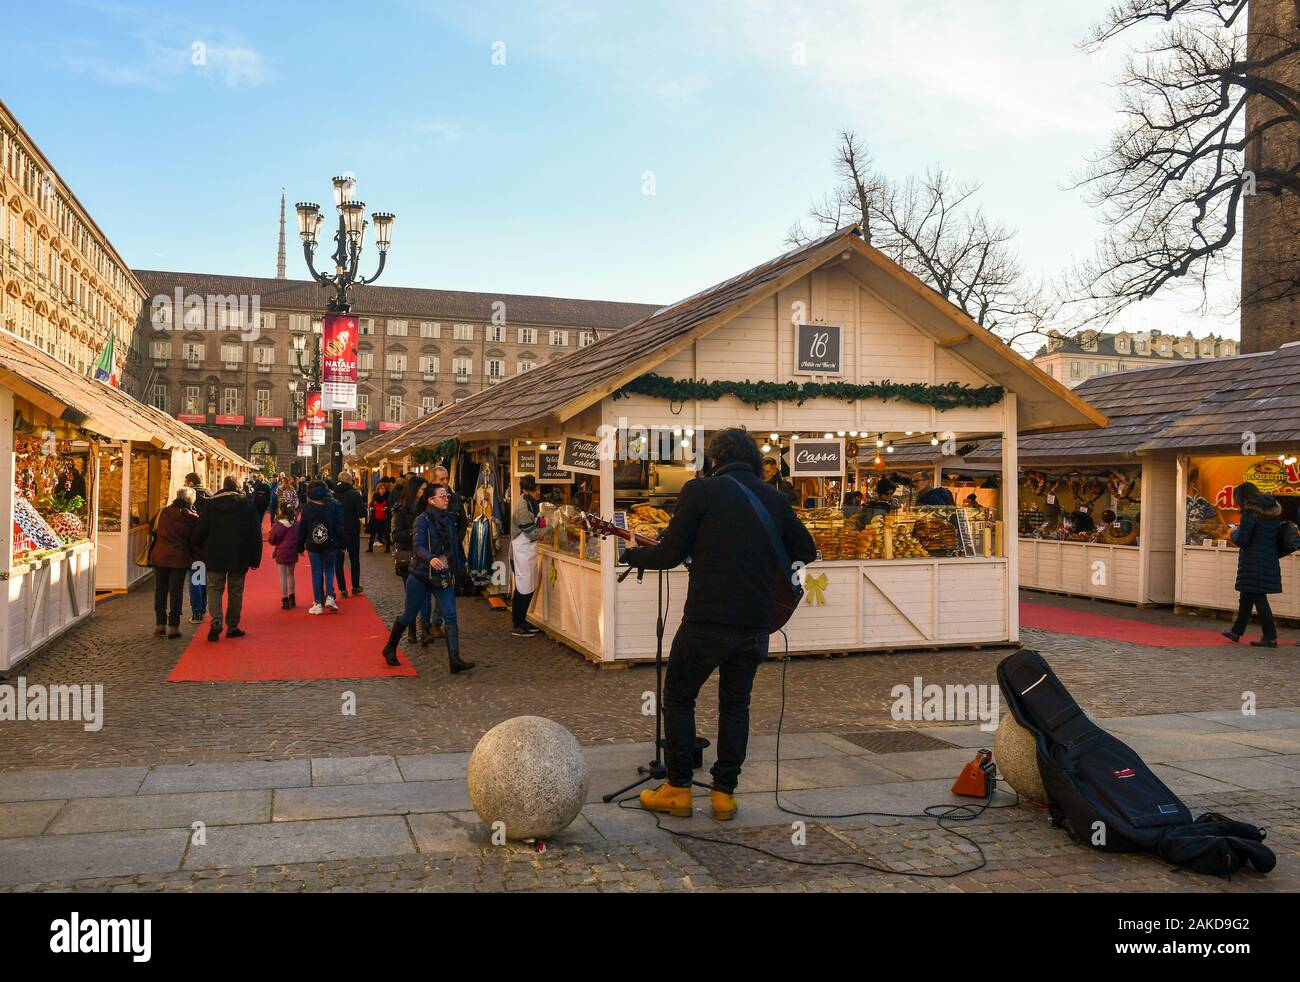 The Christmas market in Piazza Castello square in the centre of Turin with a street musician and people shopping on Christmas Eve, Piedmont, Turin Stock Photo